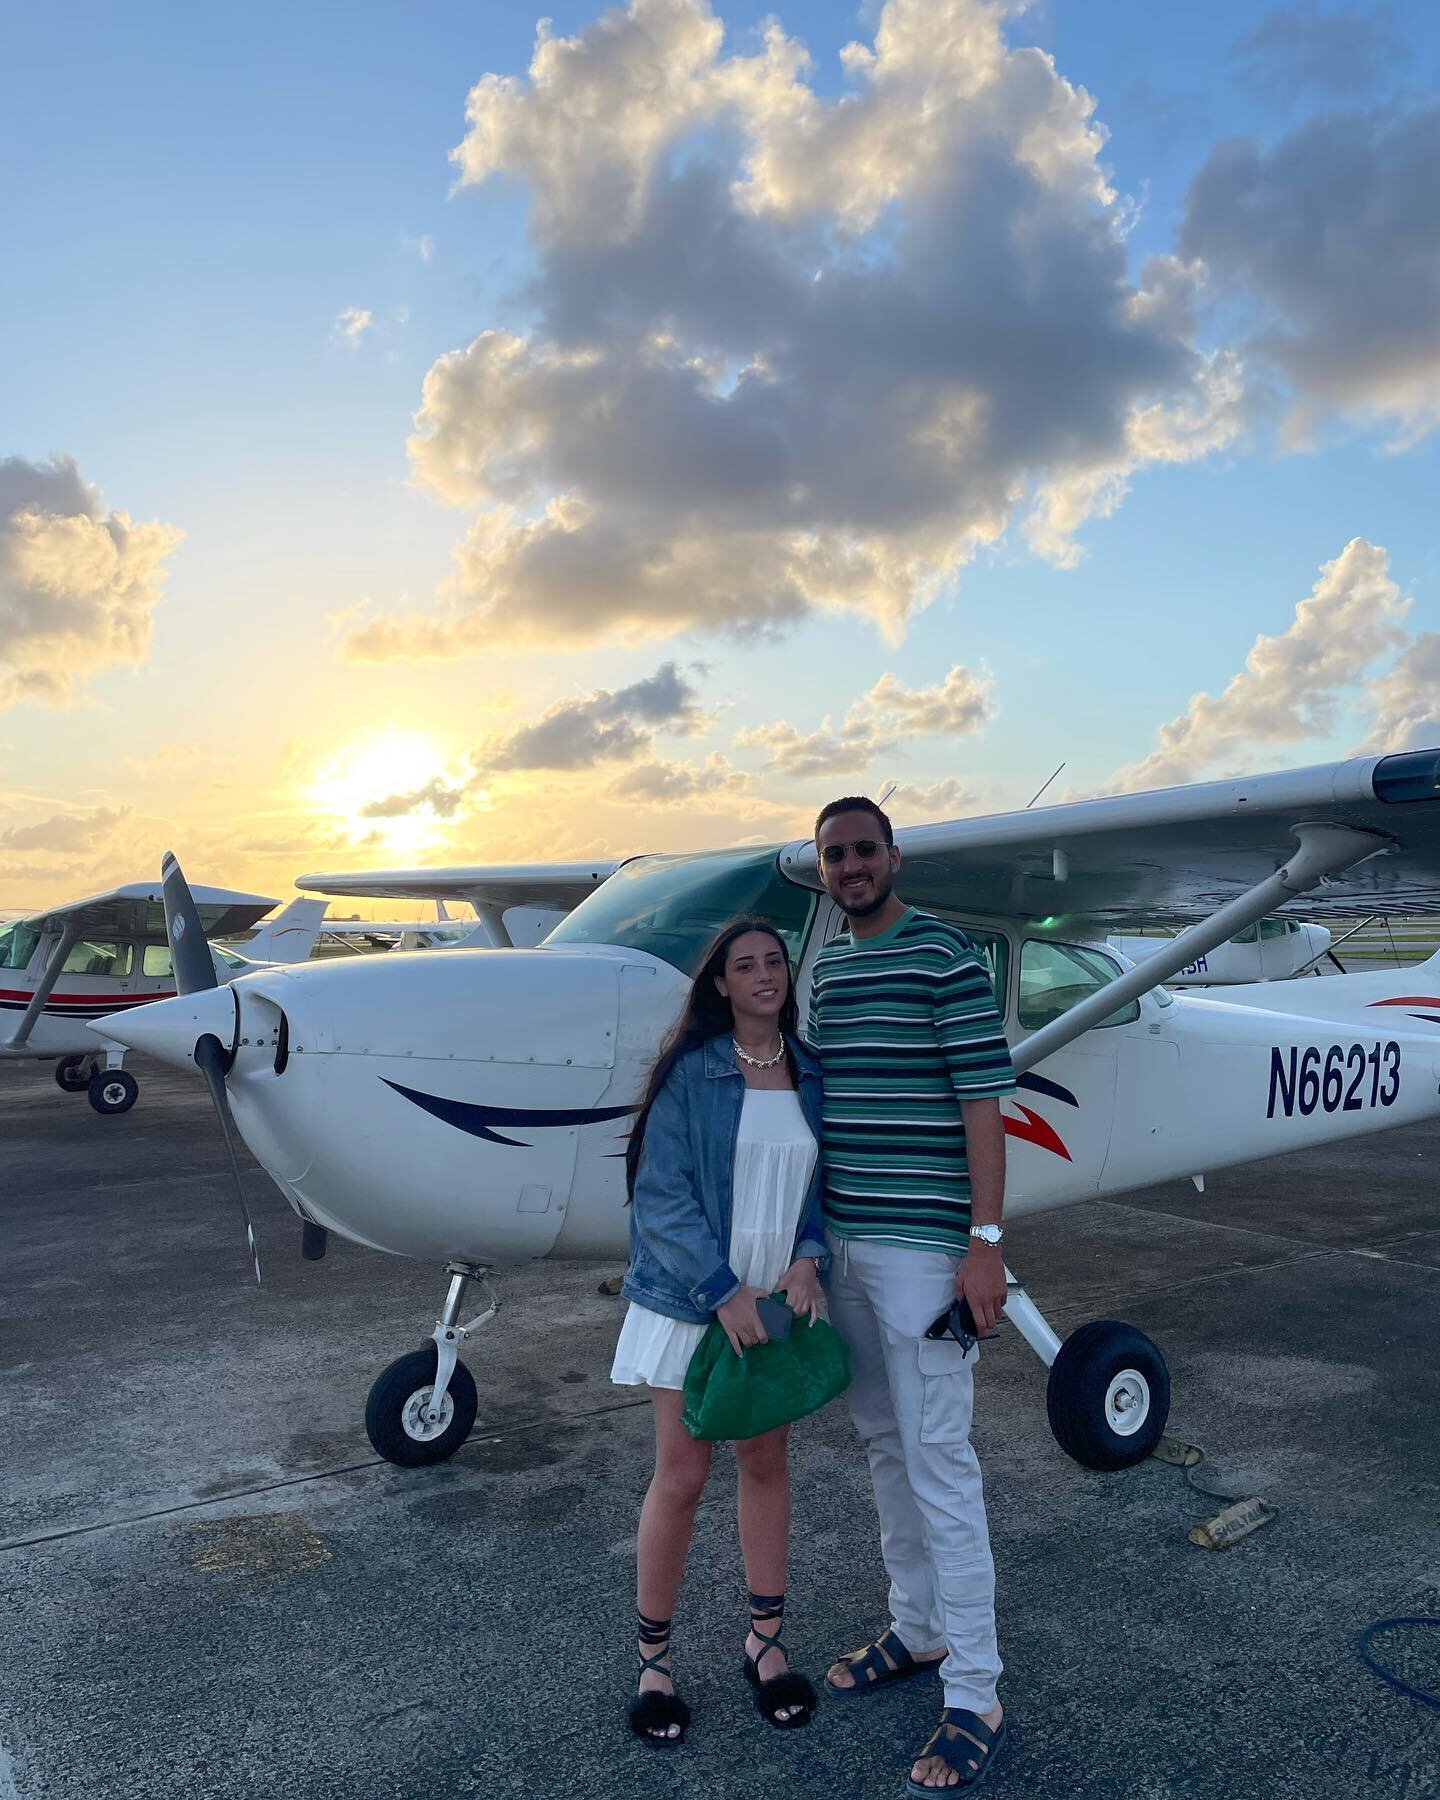 What a beautiful day to have a day!😍 Come fly with us! ✈️
.
.
#privateflight #explore #miami #planeride